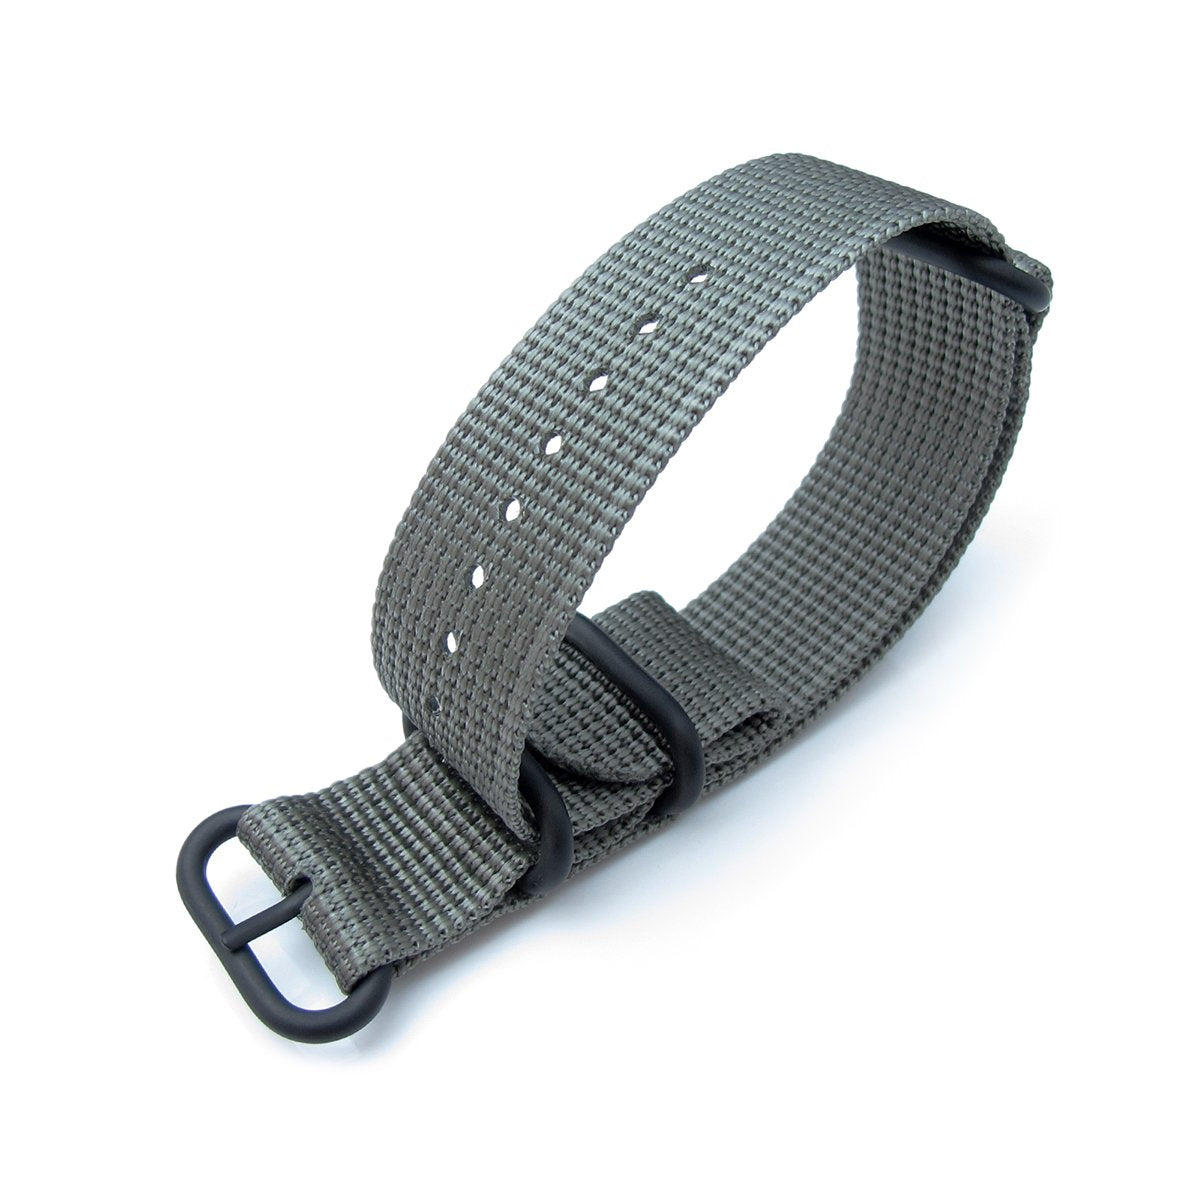 MiLTAT 20mm 22mm or 26mm 3 Rings Zulu military watch strap 3D woven nylon armband Grey PVD Black Hardware Strapcode Watch Bands